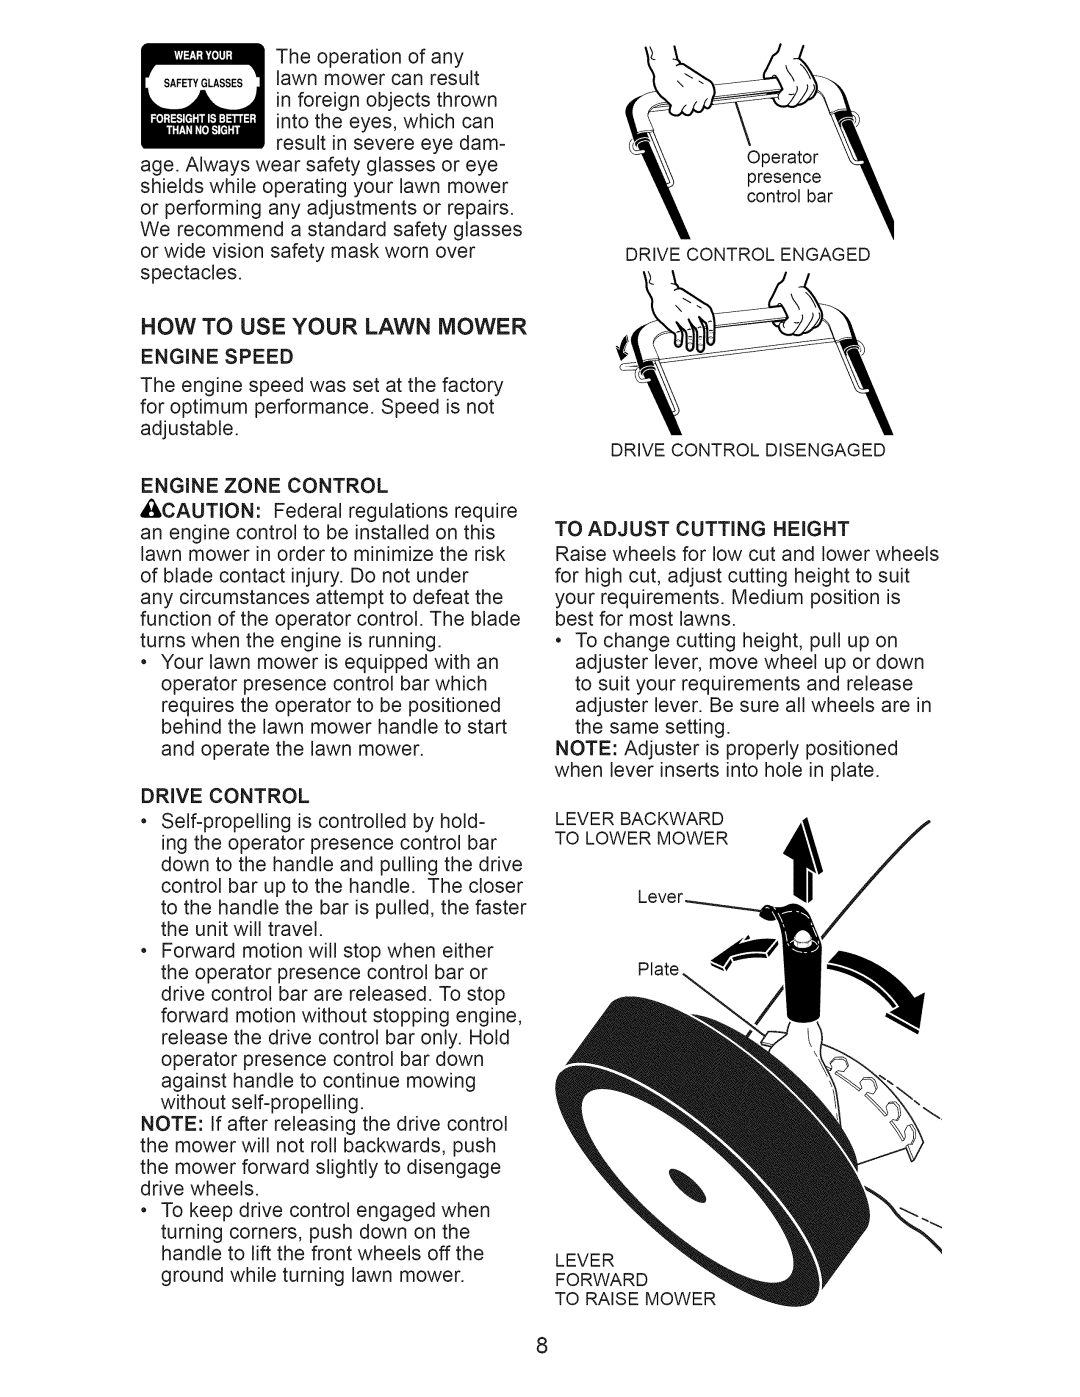 Craftsman 917.376405 owner manual HOW to USE Your Lawn Mower, Engine Speed, Engine Zone Control, Drive Control 